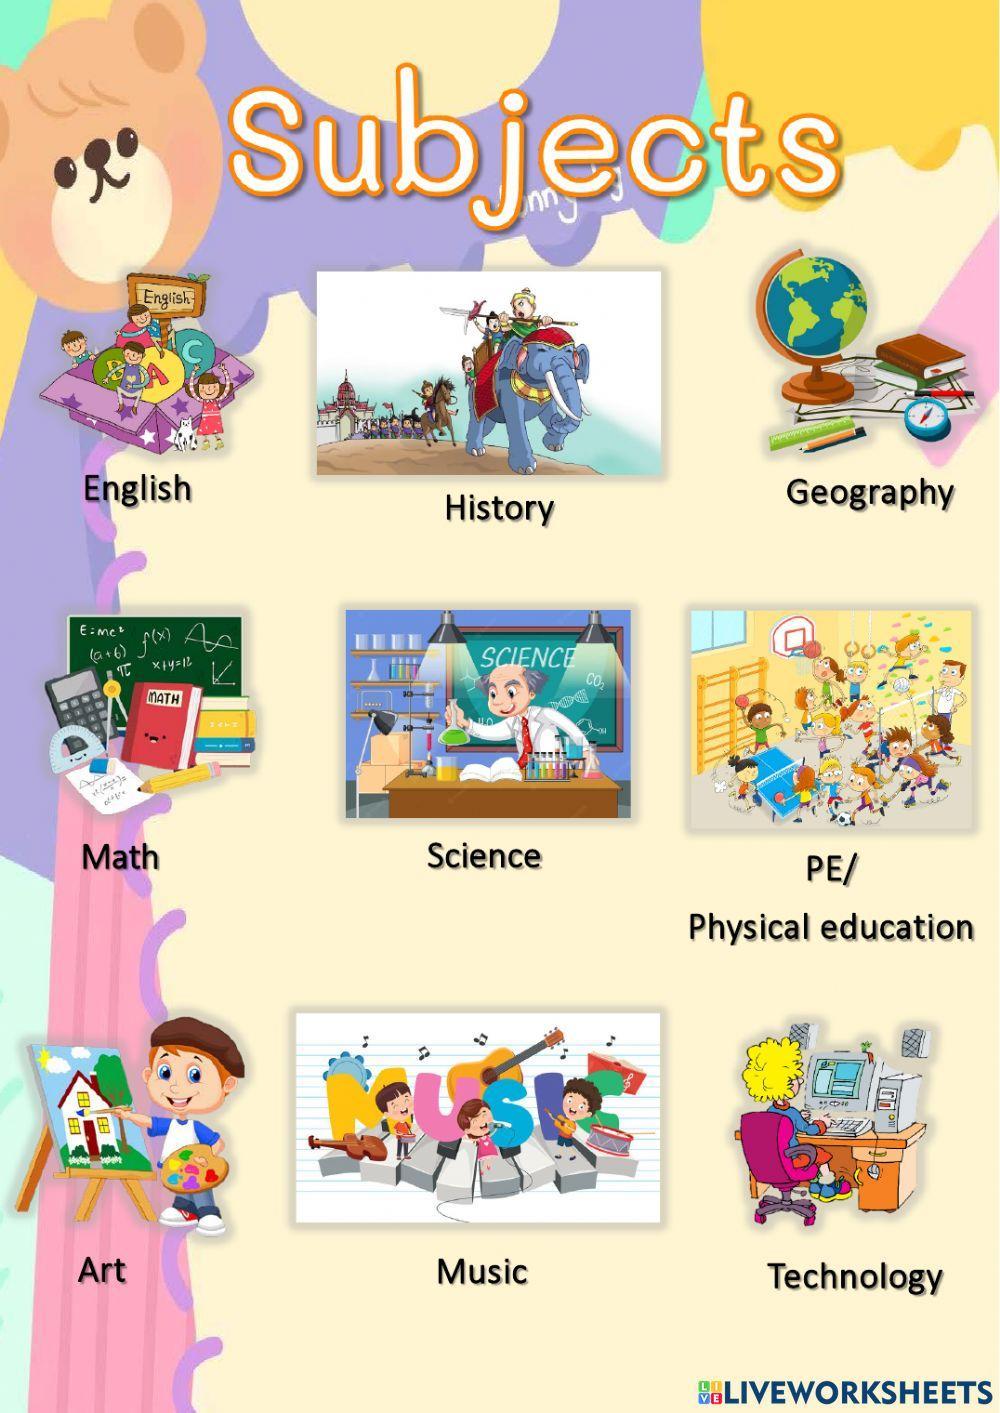 Vocabulary about things in the classroom, sports and subjects.